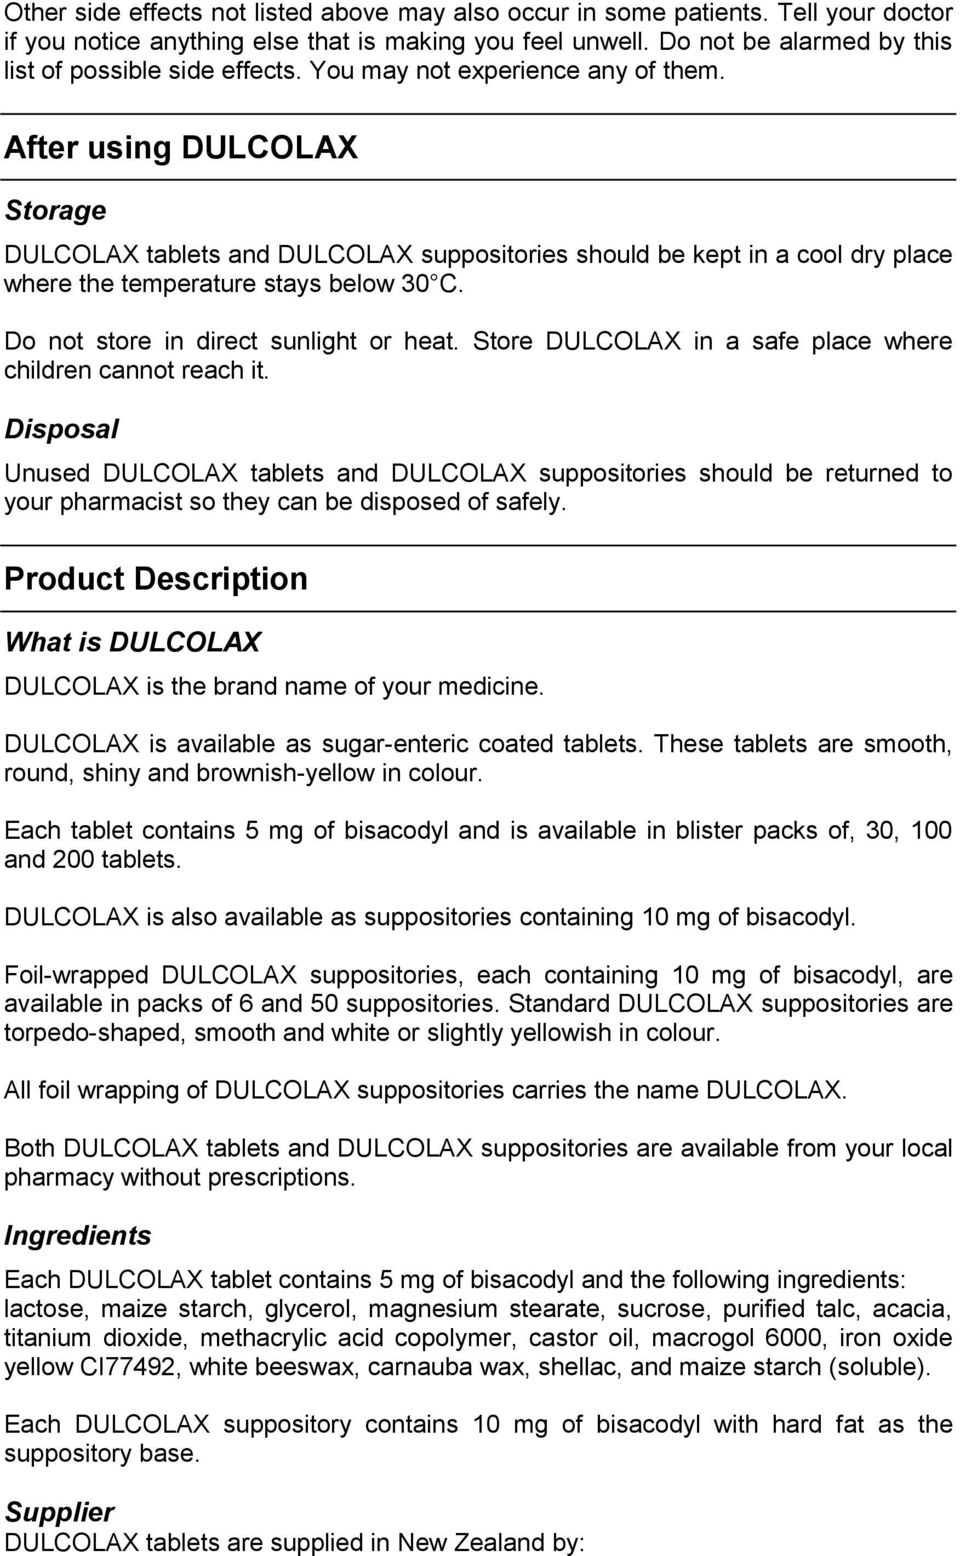 After using DULCOLAX Storage DULCOLAX tablets and DULCOLAX suppositories should be kept in a cool dry place where the temperature stays below 30 C. Do not store in direct sunlight or heat.